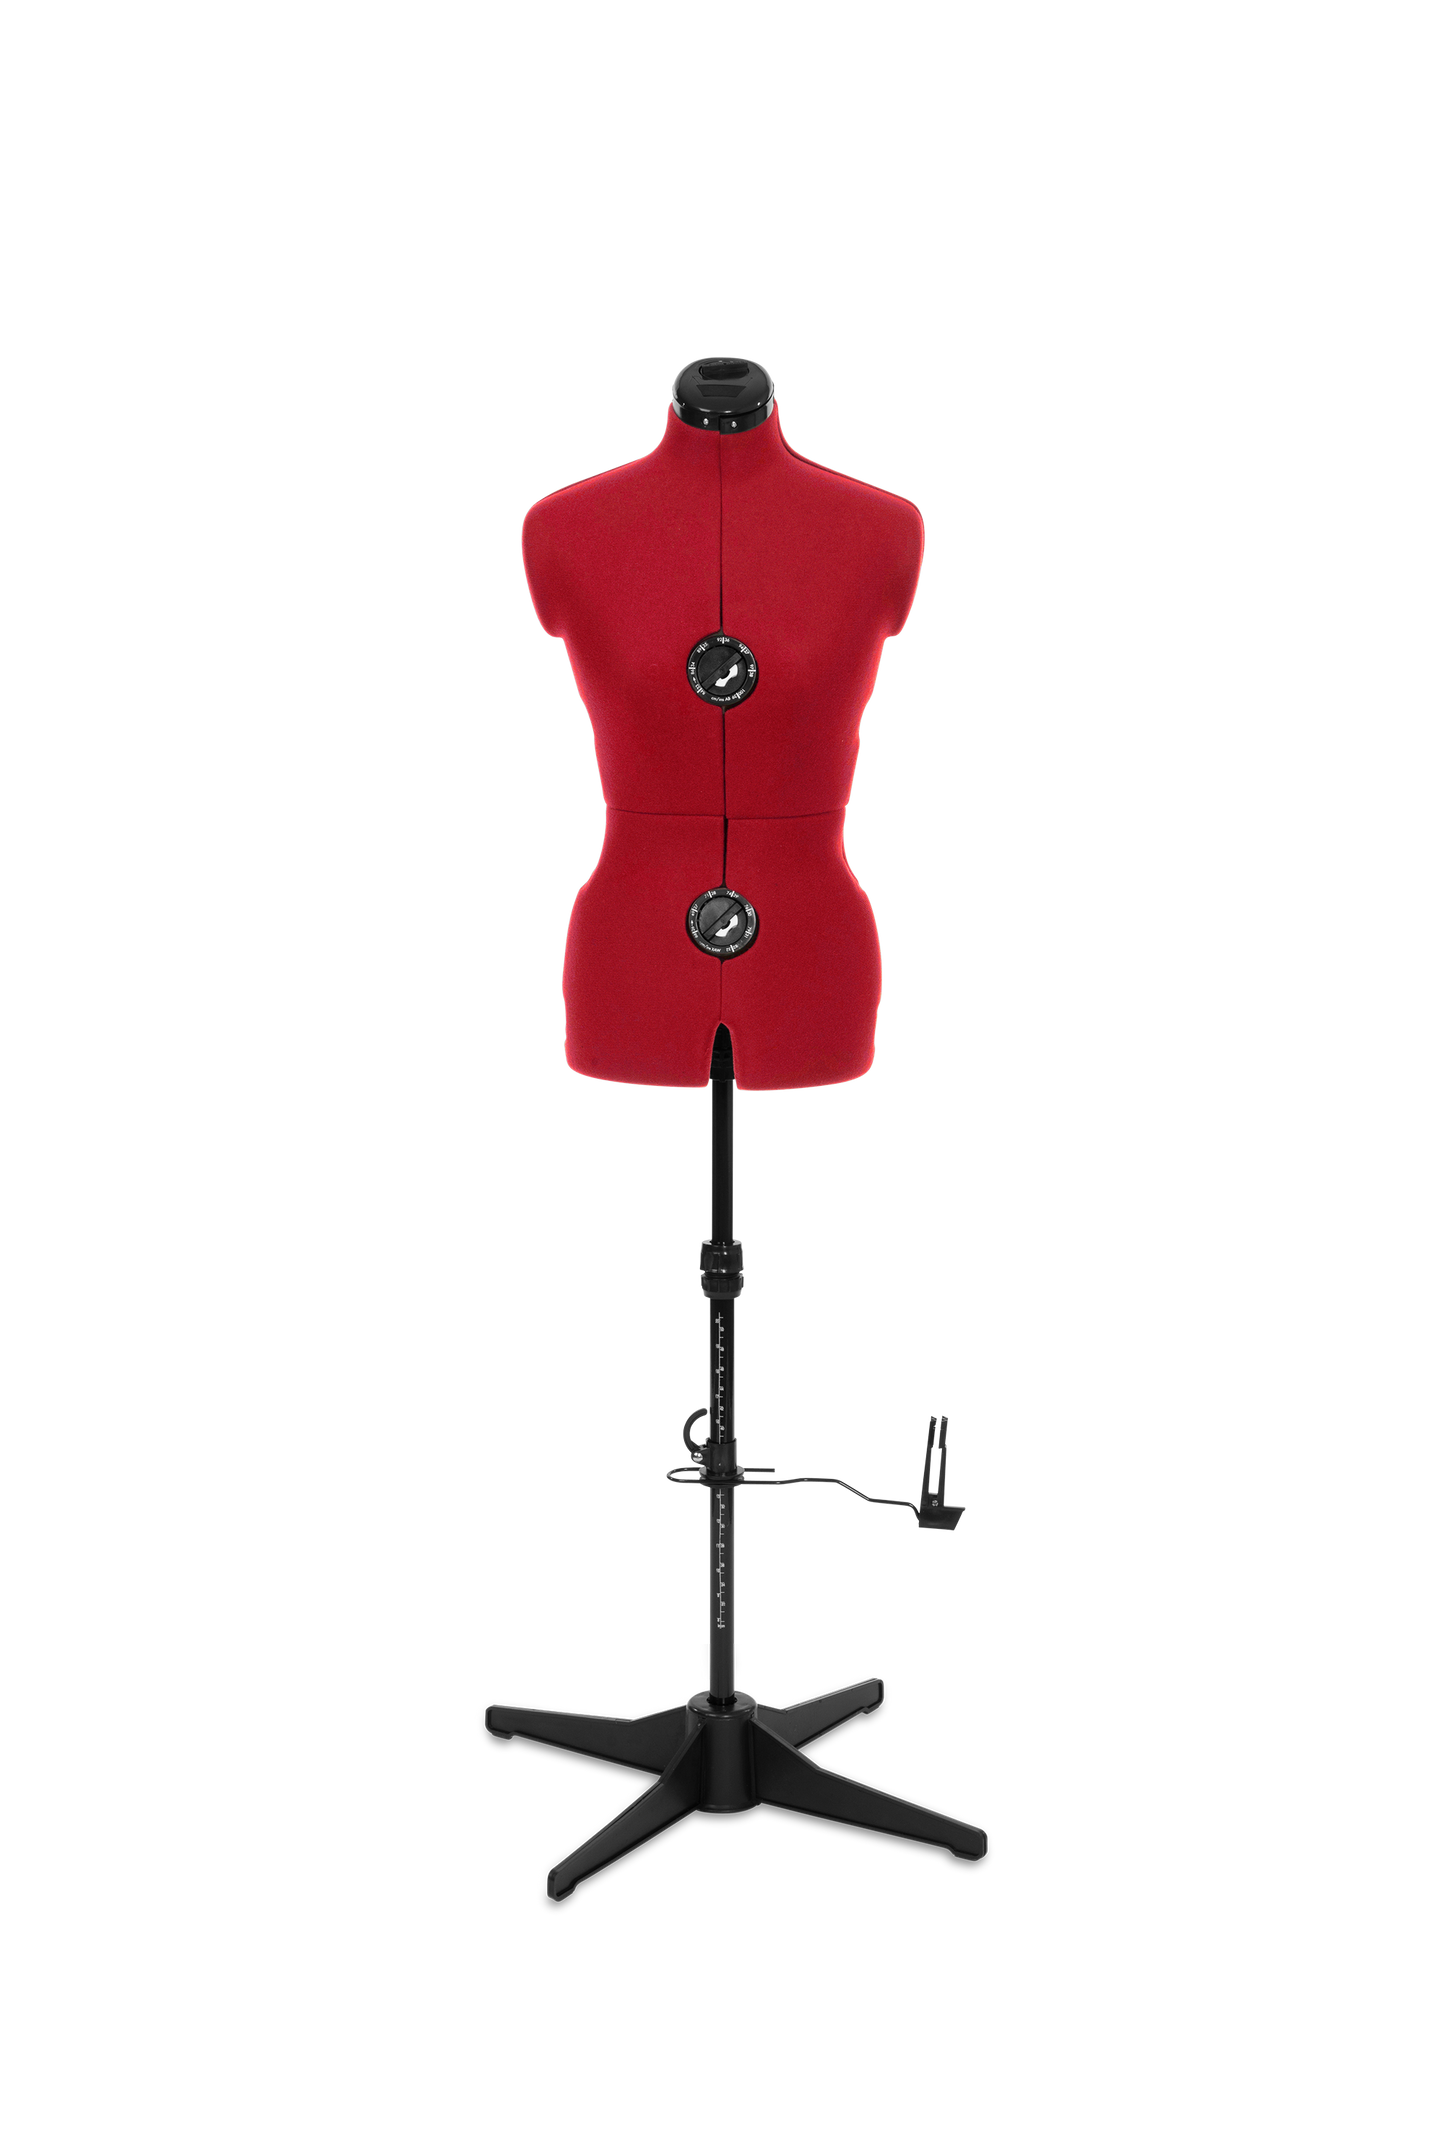 Adjustoform Tailormaid Adjustable Dress Form * Limited Edition Singer Red * 11 adjusters - Dress sizes 6 to 22 in 2 size options - Made in the UK